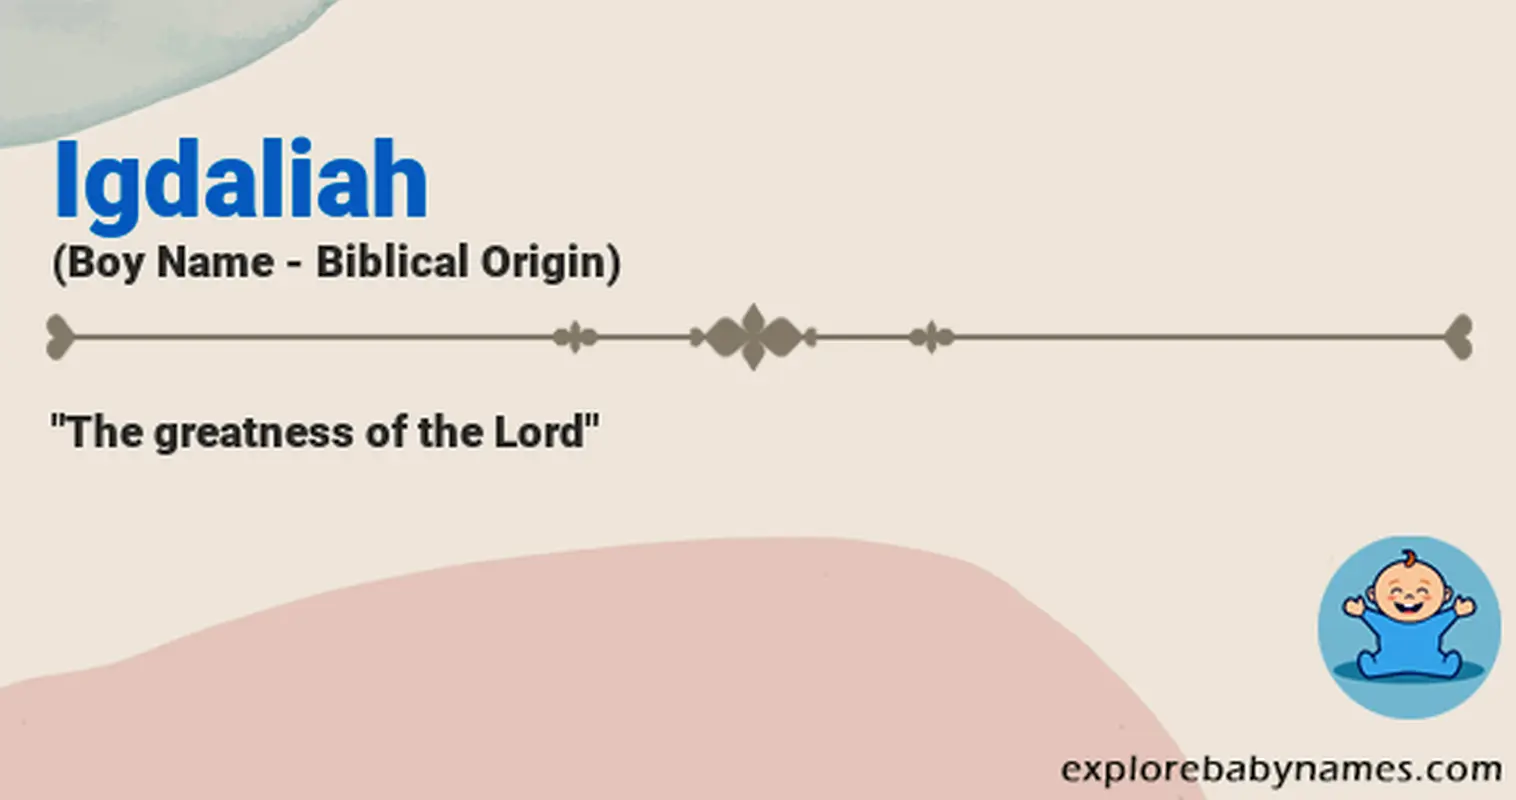 Meaning of Igdaliah